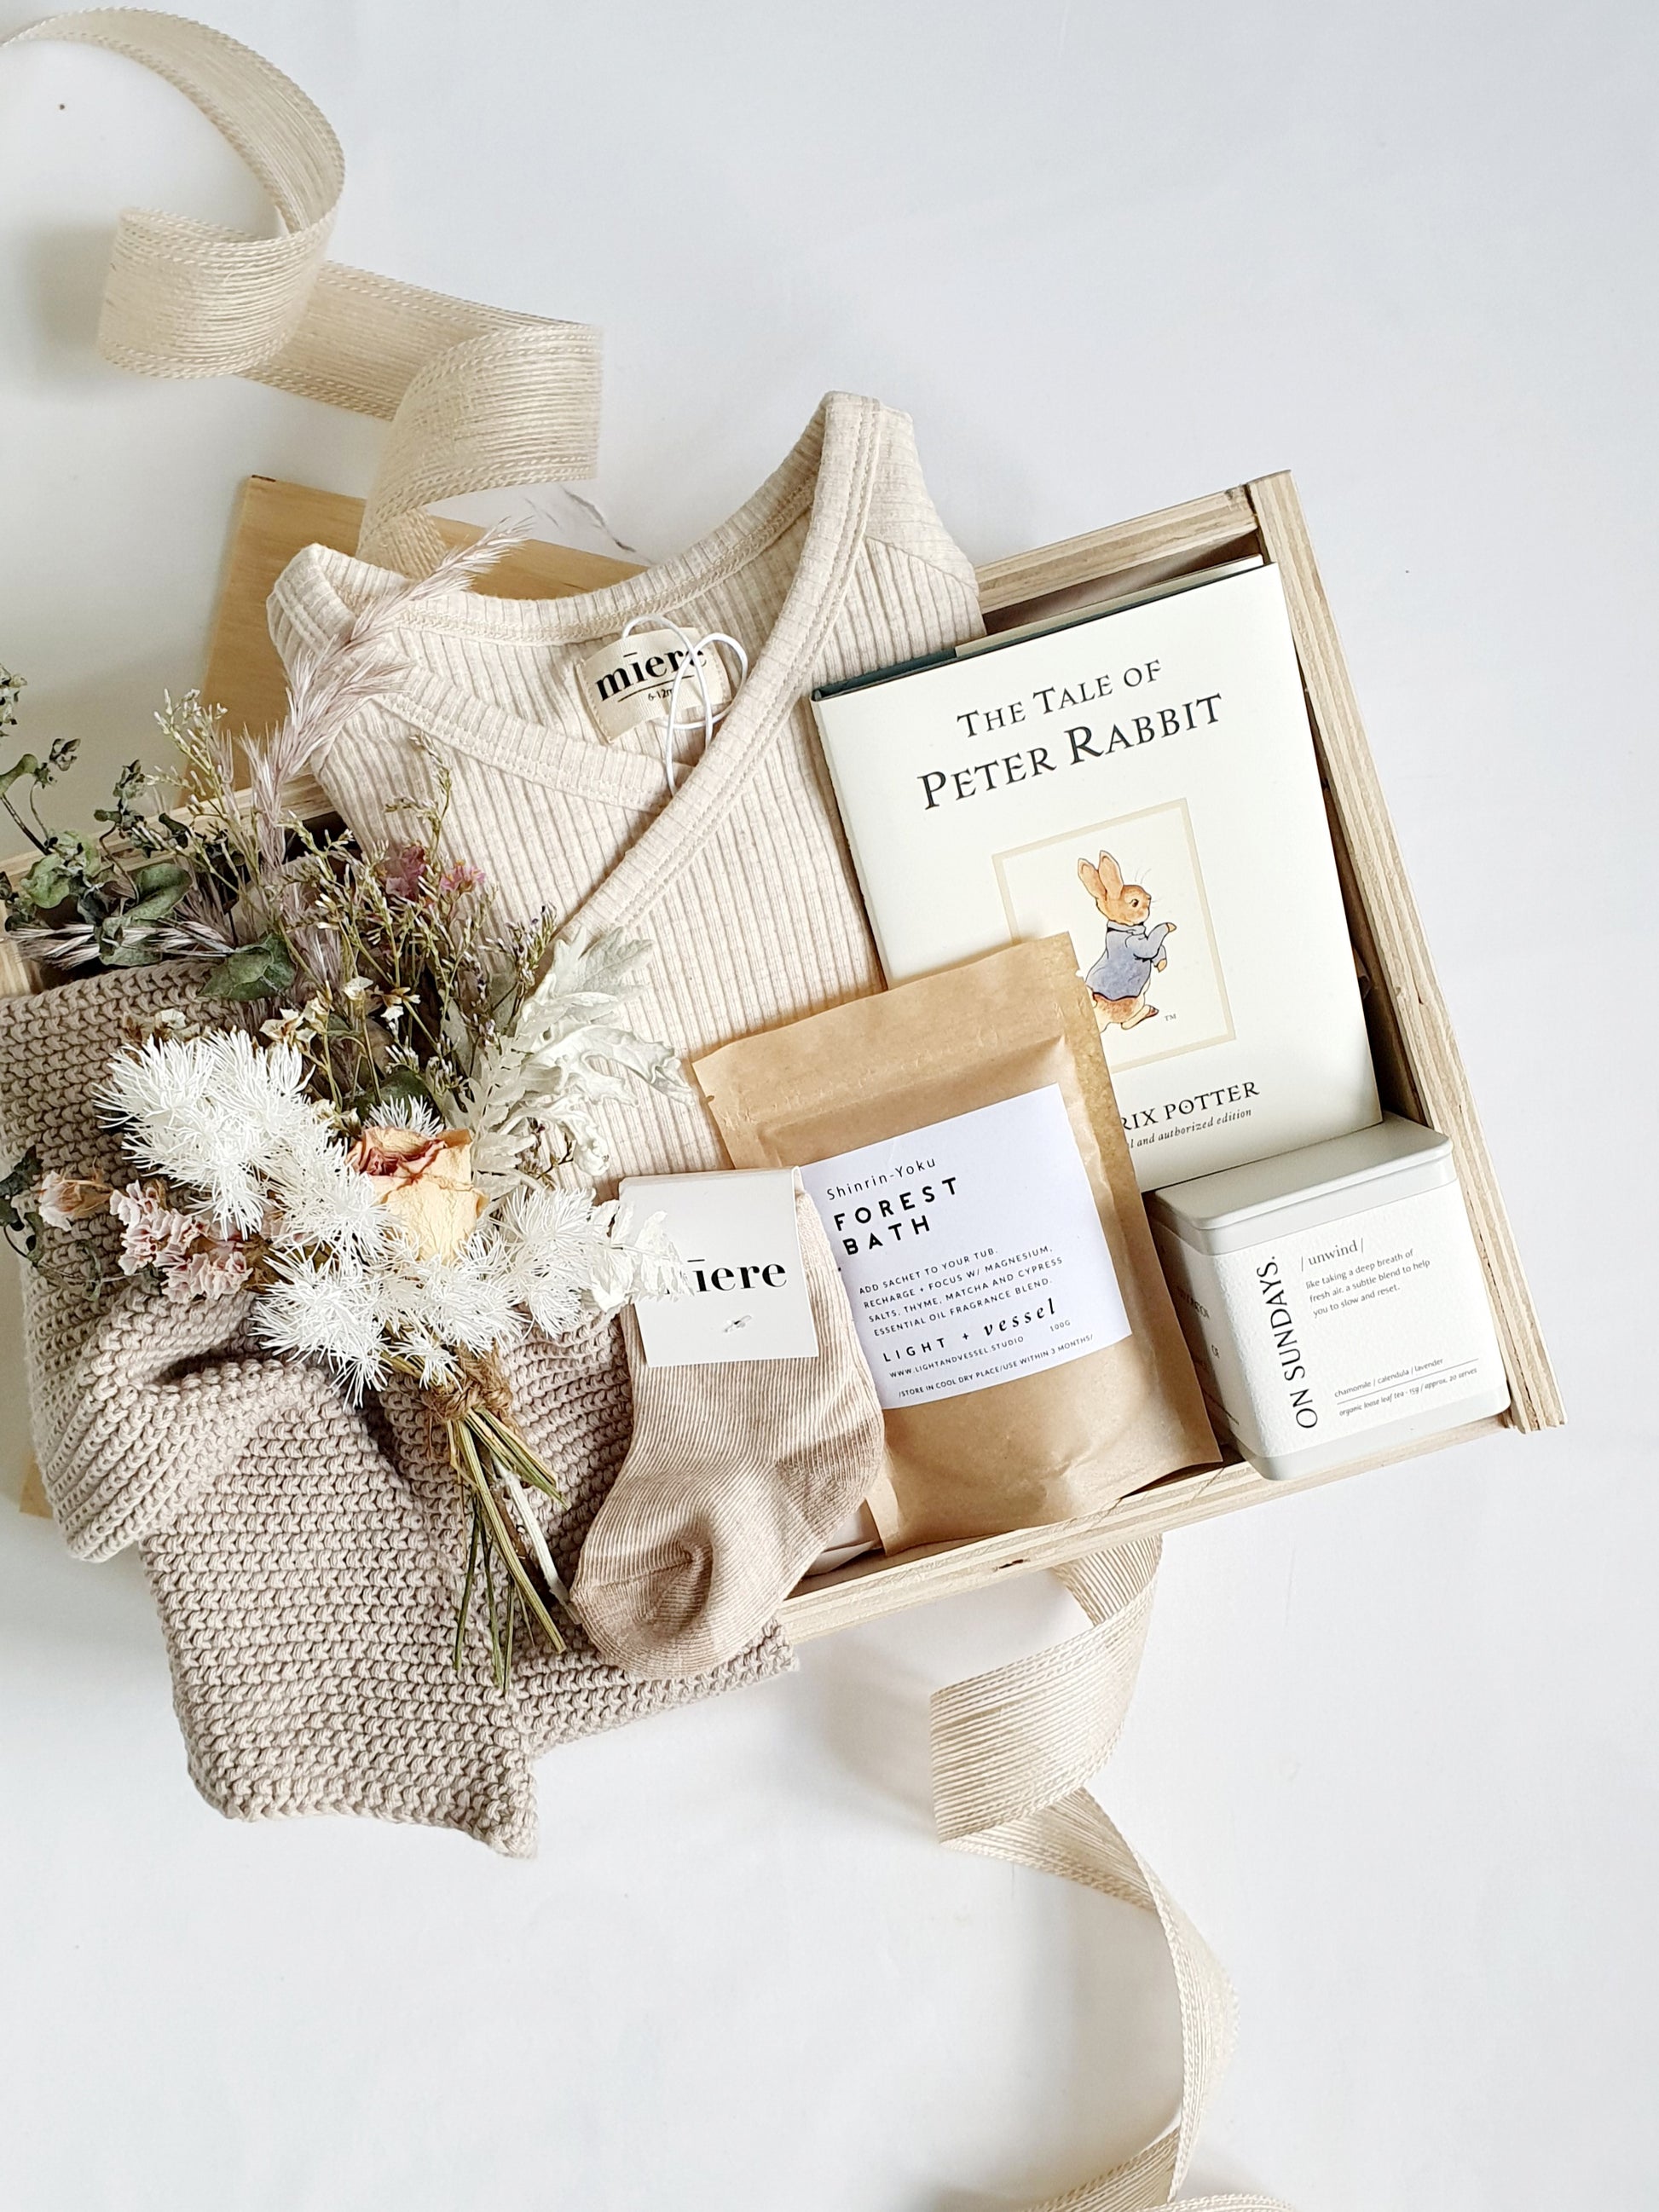 Baby shower gifts and the best baby gifts in nz! By Bundle + Blooms  luxury gift boxes.